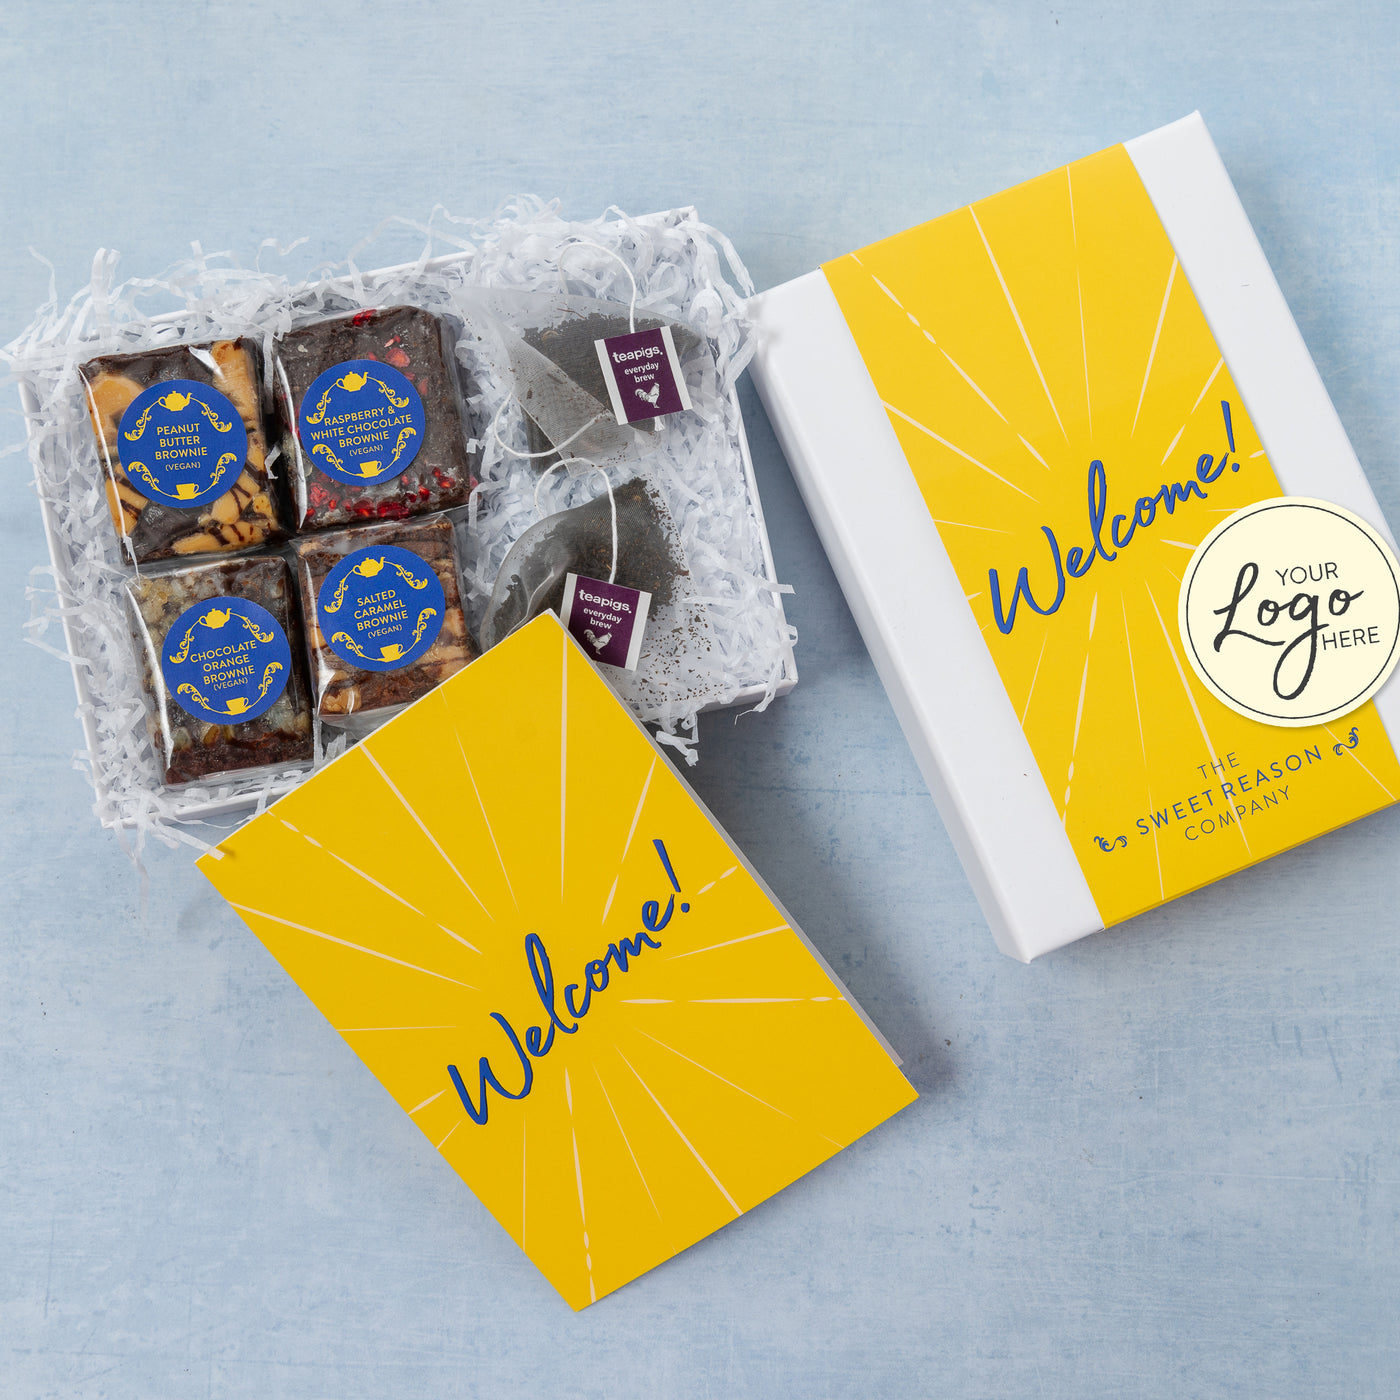 Branded & personalised 'Welcome!' Vegan Afternoon Tea for Two Gift